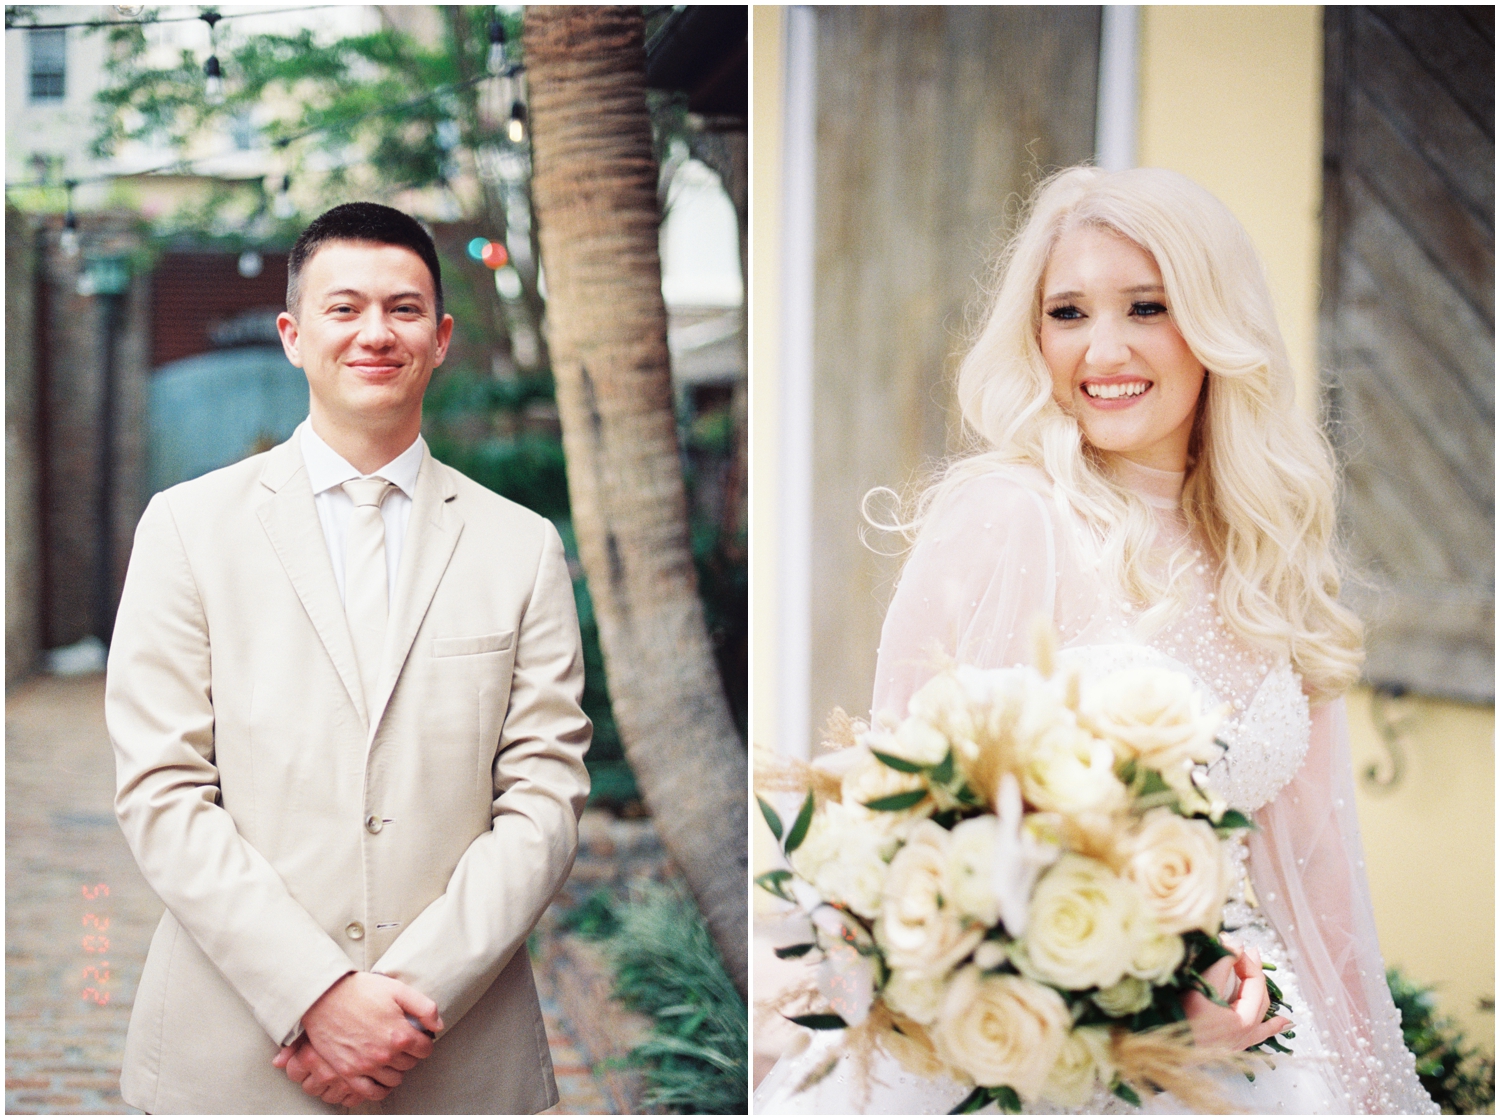 A bride and groom pose in different locations for wedding portraits on film.